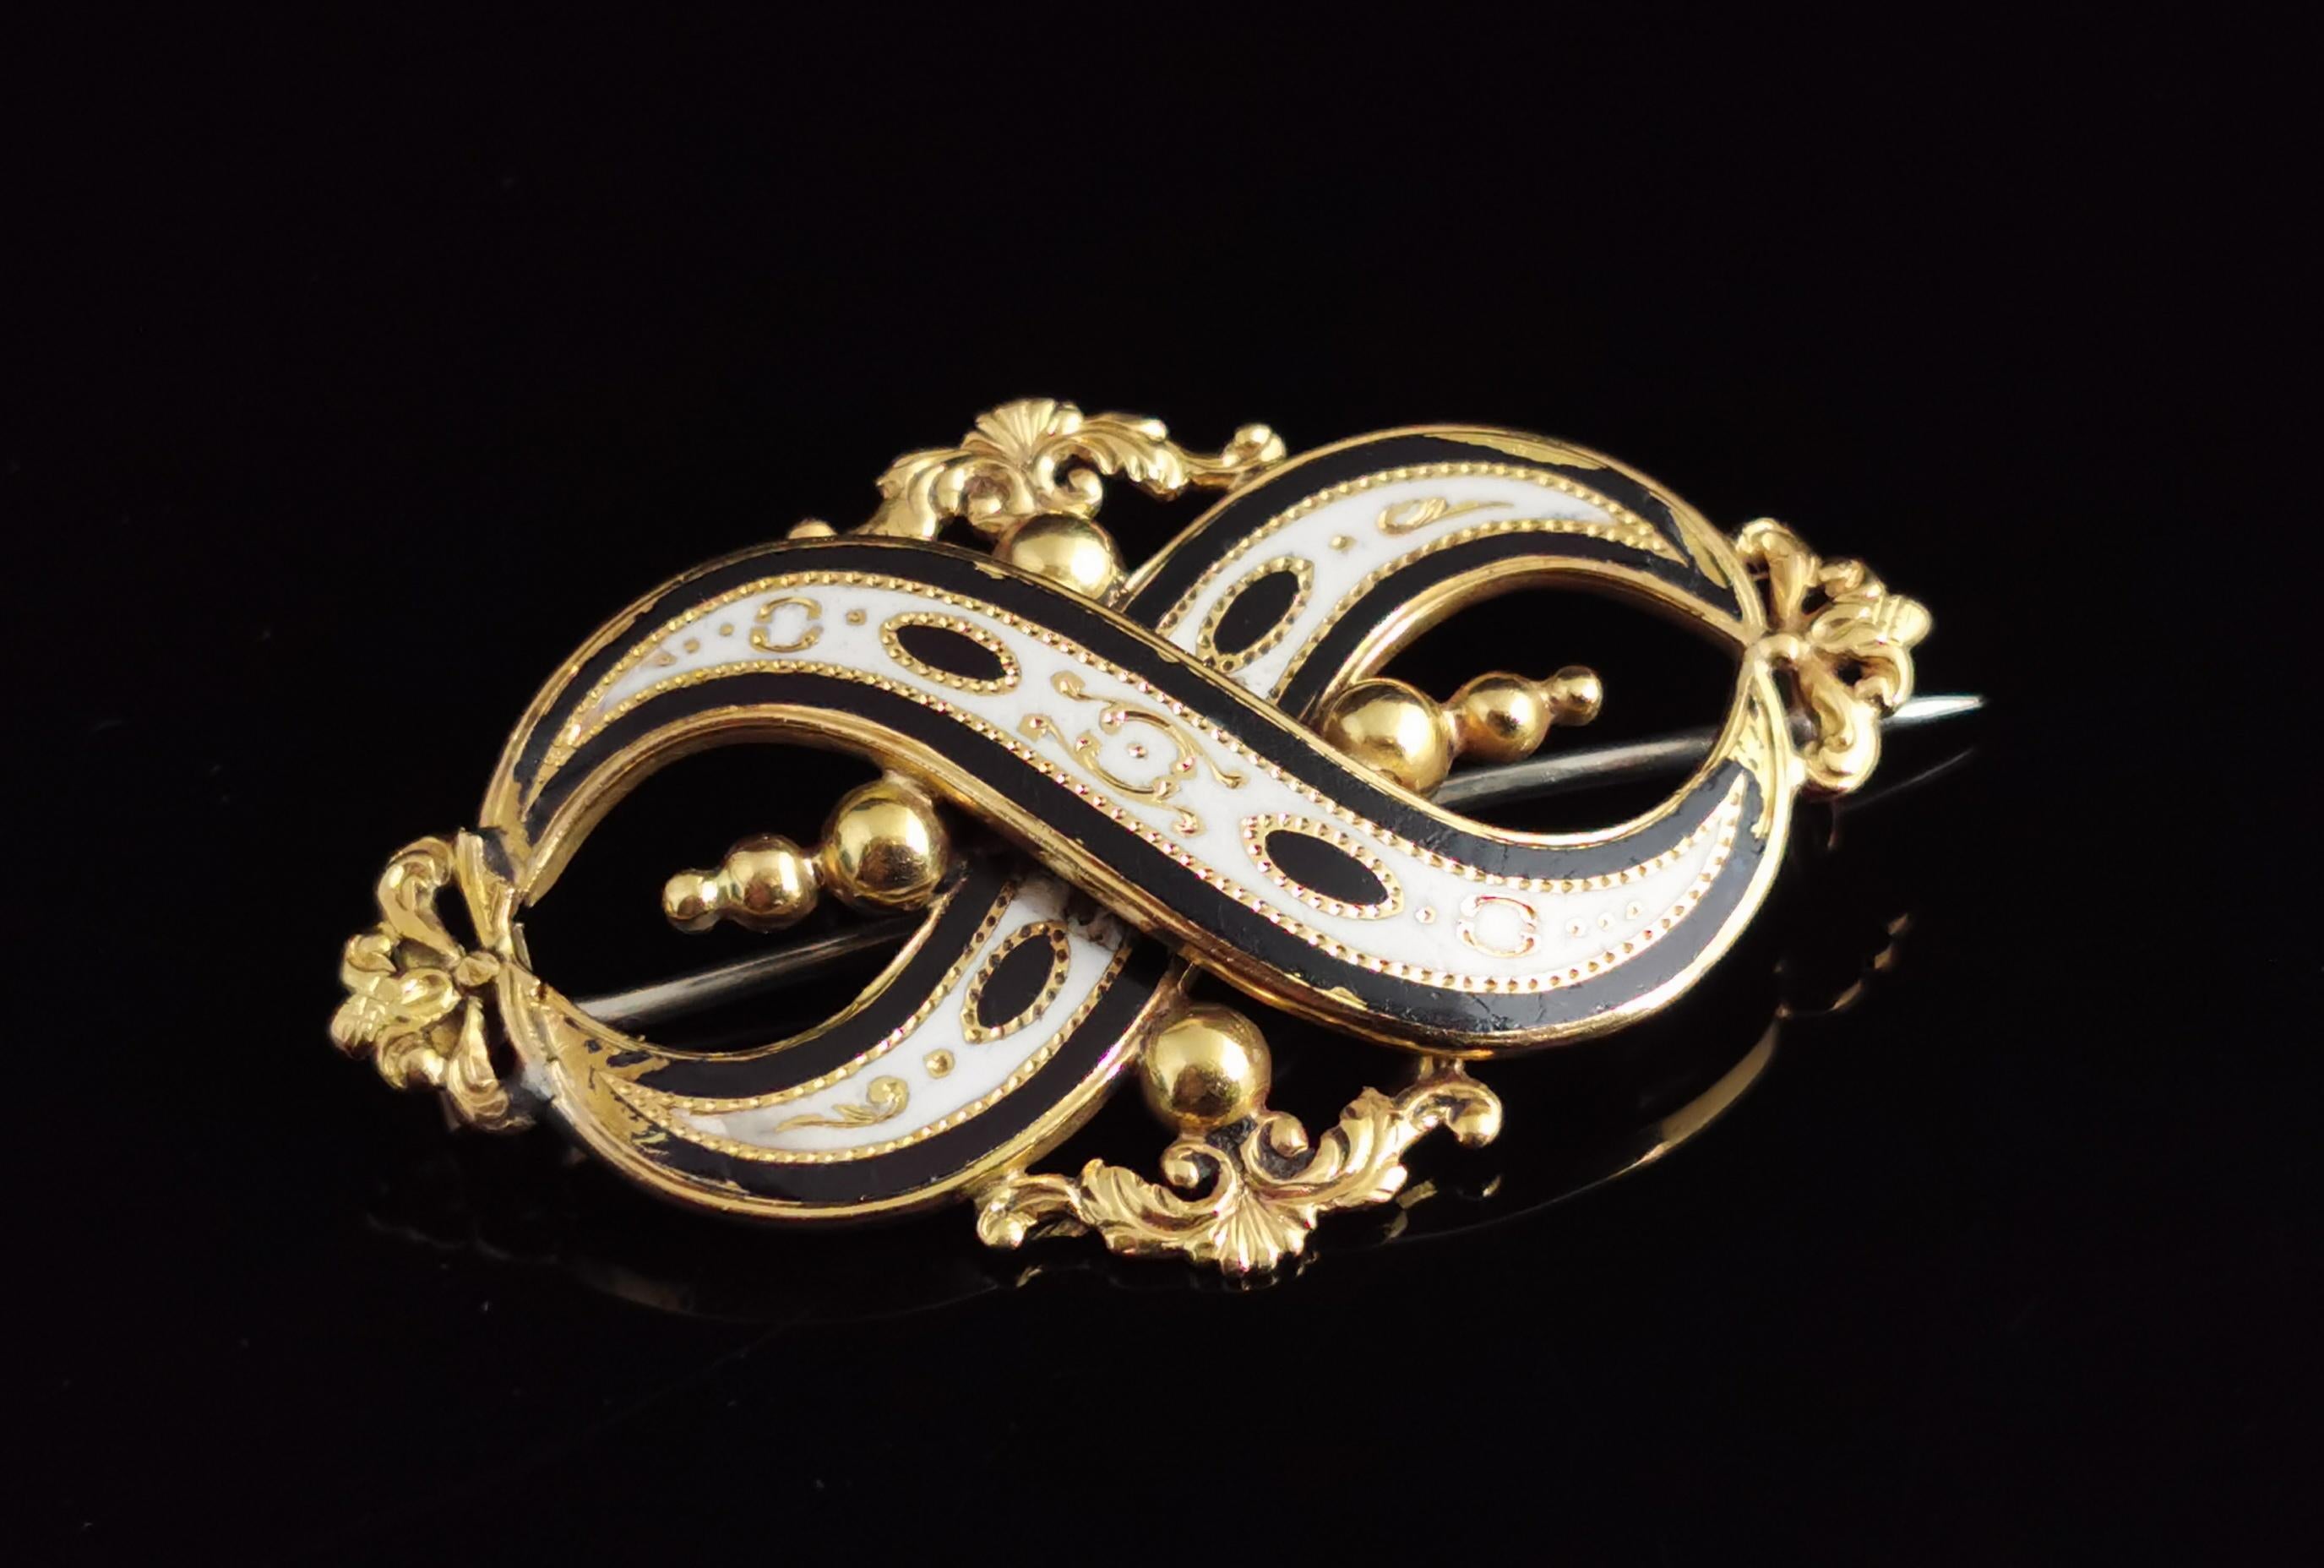 Antique Victorian Mourning Brooch, 15 Karat Yellow Gold, Black and White Enamel 4